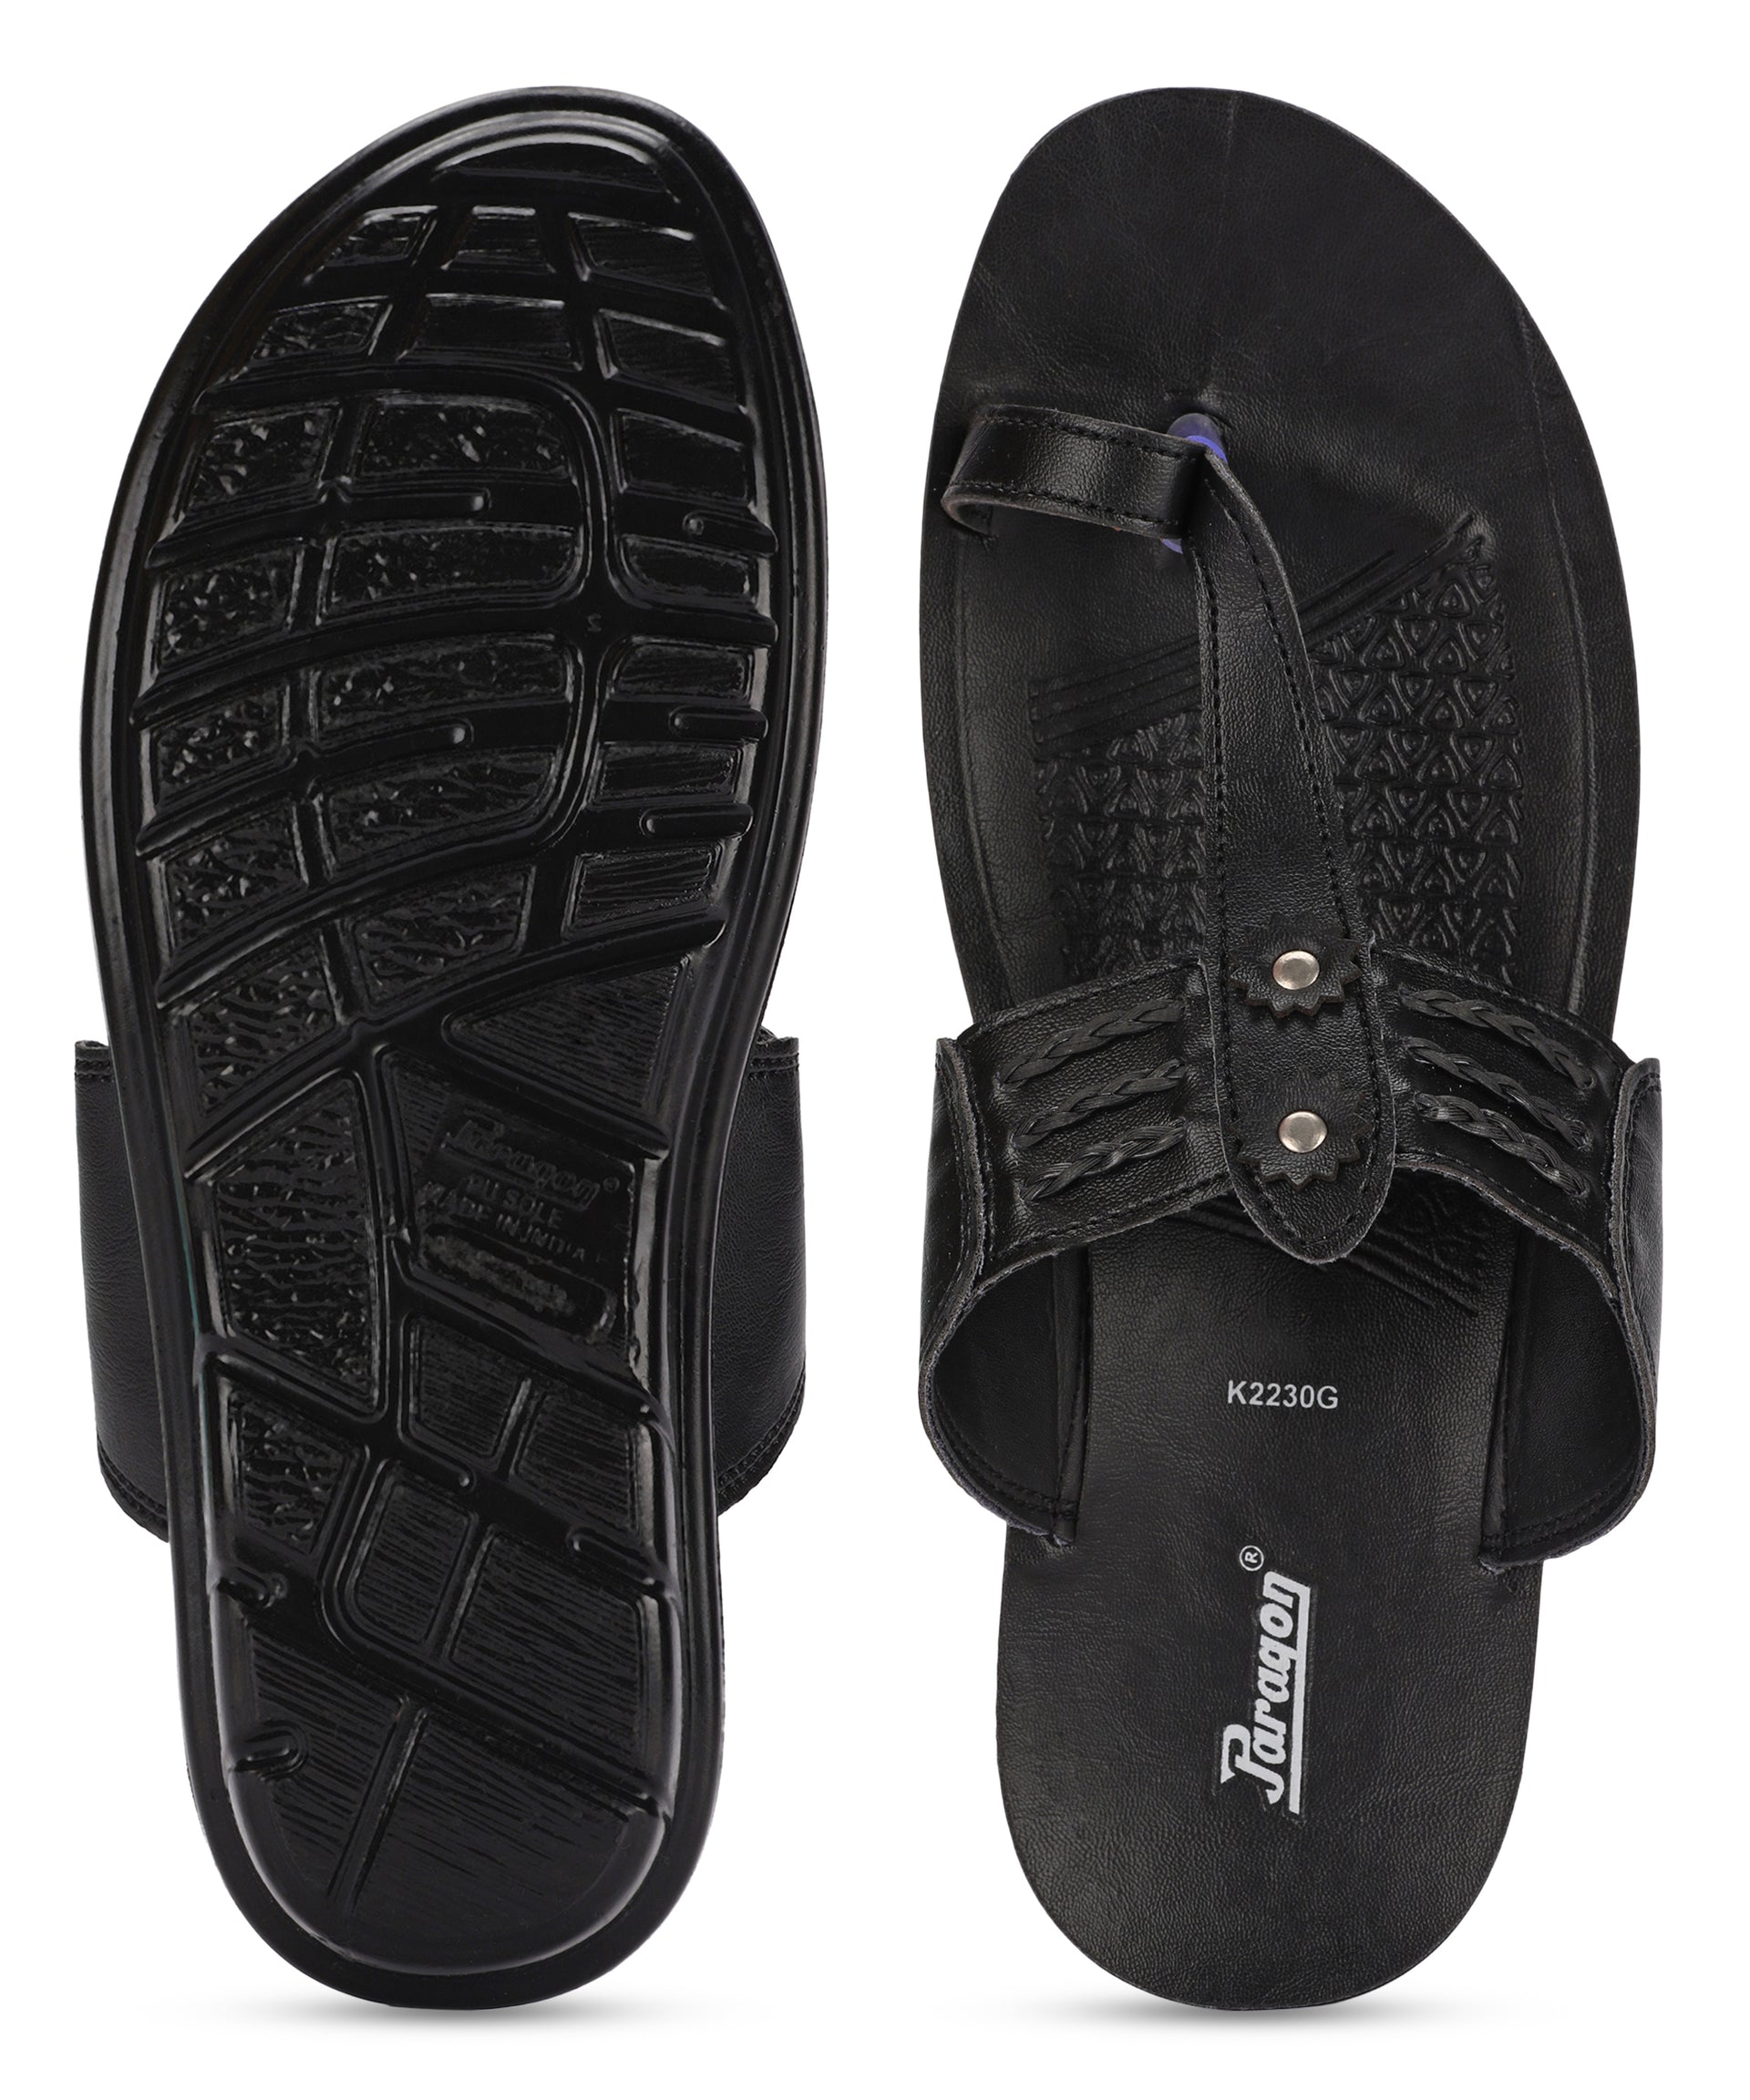 Paragon PUK2230G Men Stylish Sandals | Comfortable Sandals for Daily Outdoor Use | Casual Formal Sandals with Cushioned Soles